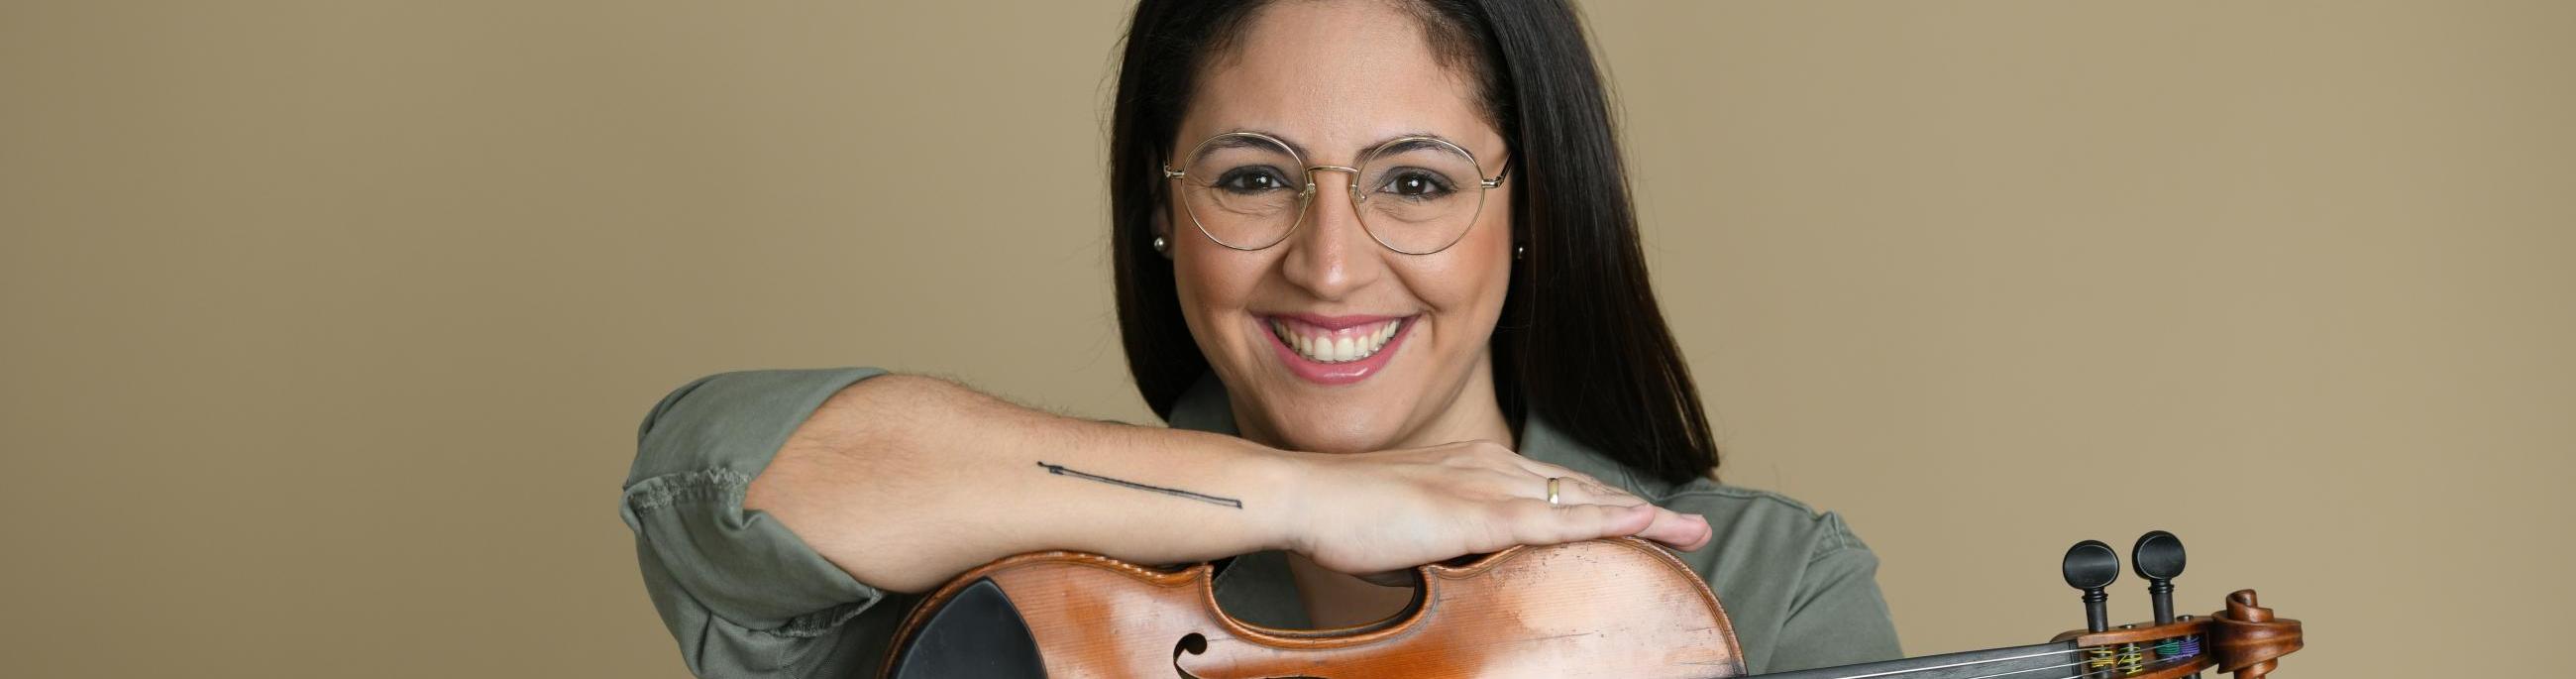 woman with dark hair and glases holding a violin 